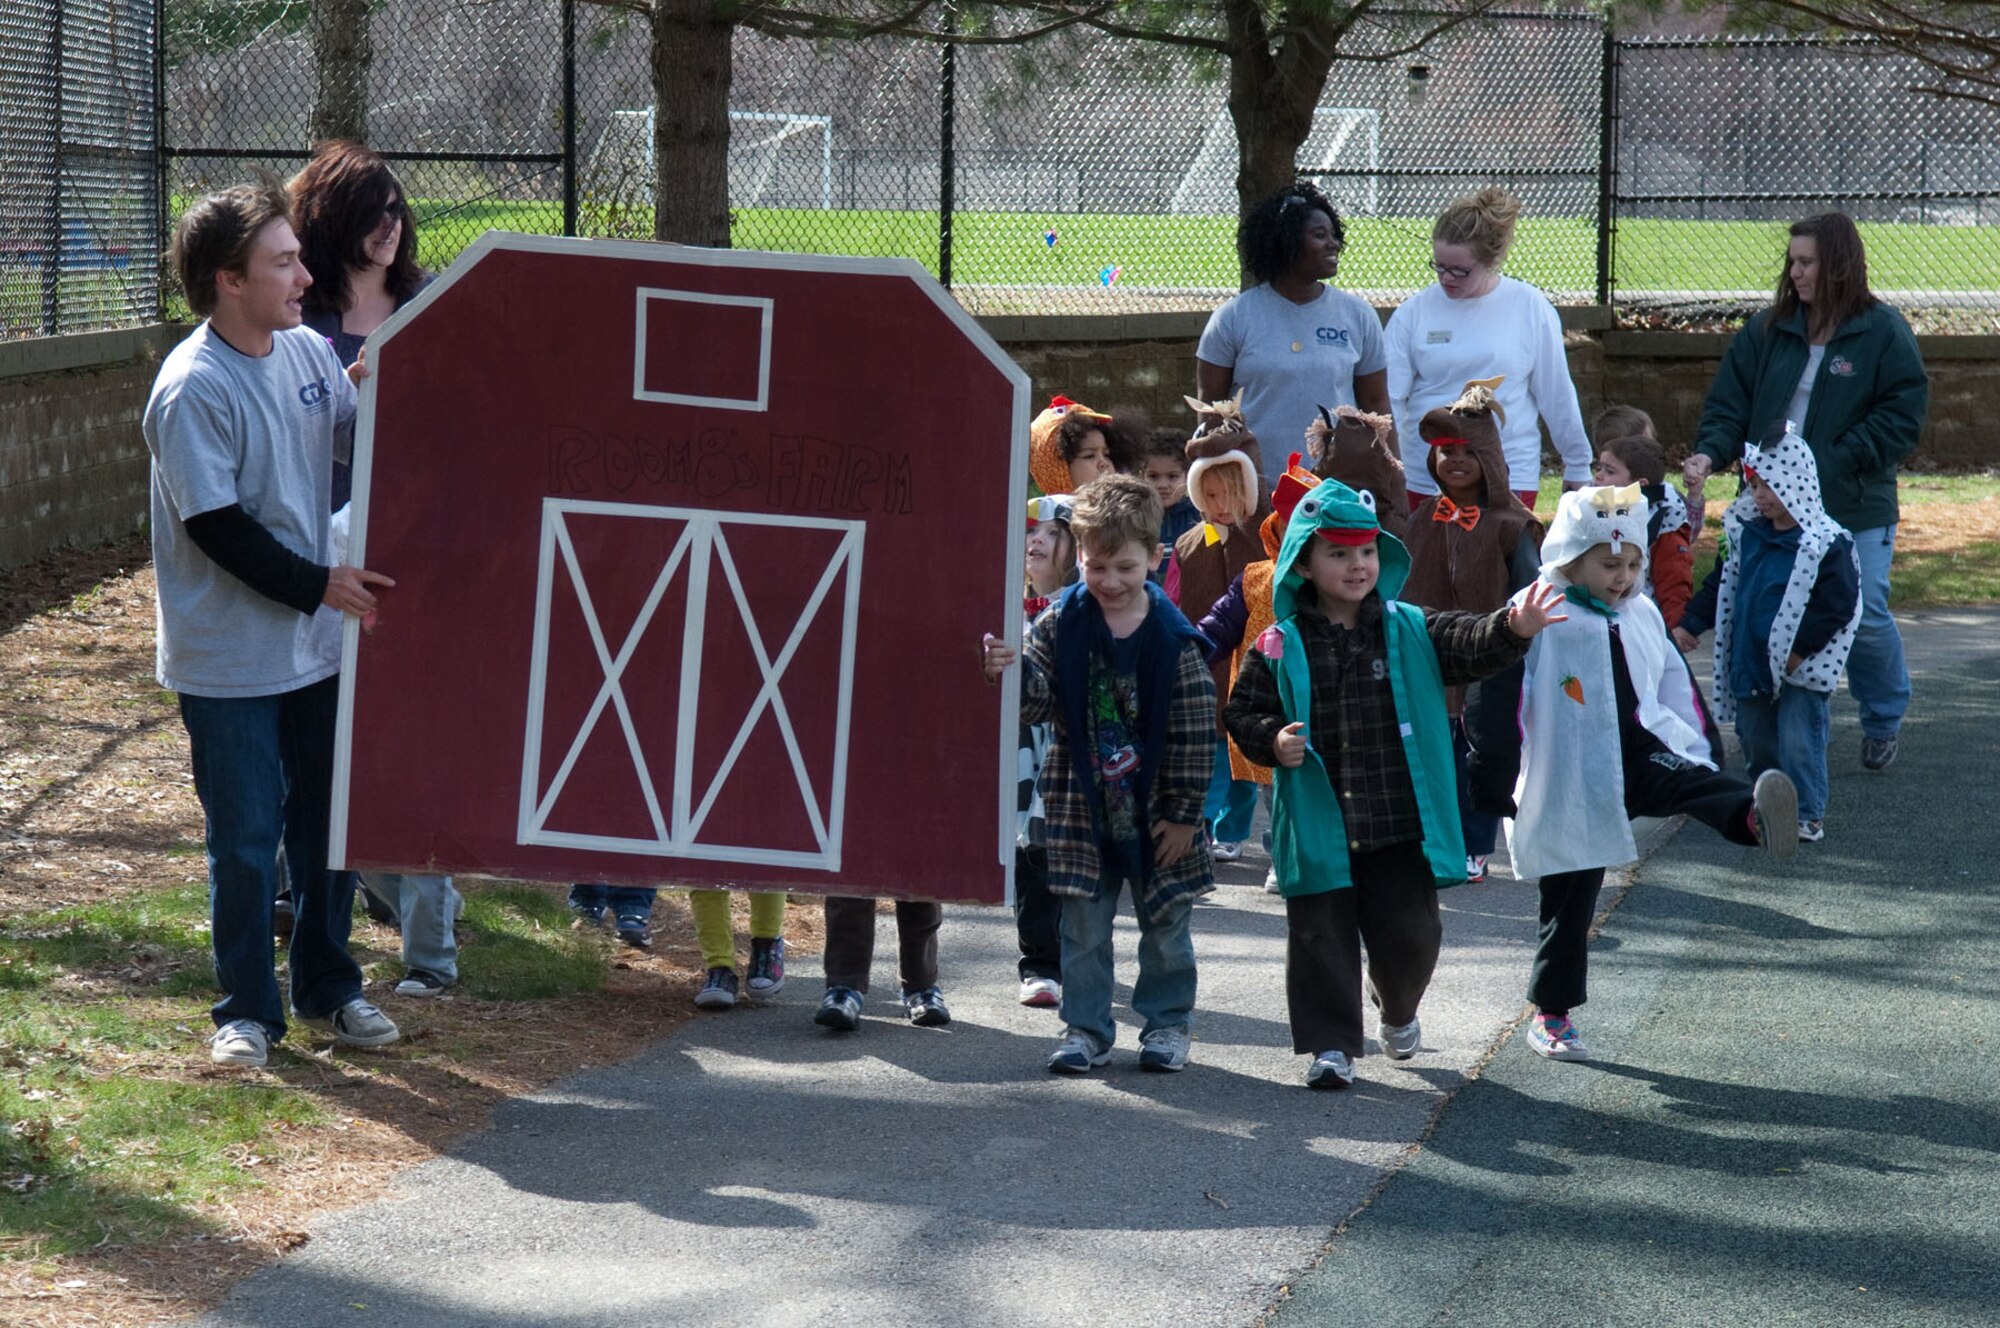 HANSCOM AIR FORCE BASE, Mass. – Children dressed up as barnyard animals march around the Child Development Center during the Parade of Floats April 21. The parade was one of many events held to celebrate Month of the Military Child. (U.S. Air Force photo by Rick Berry)